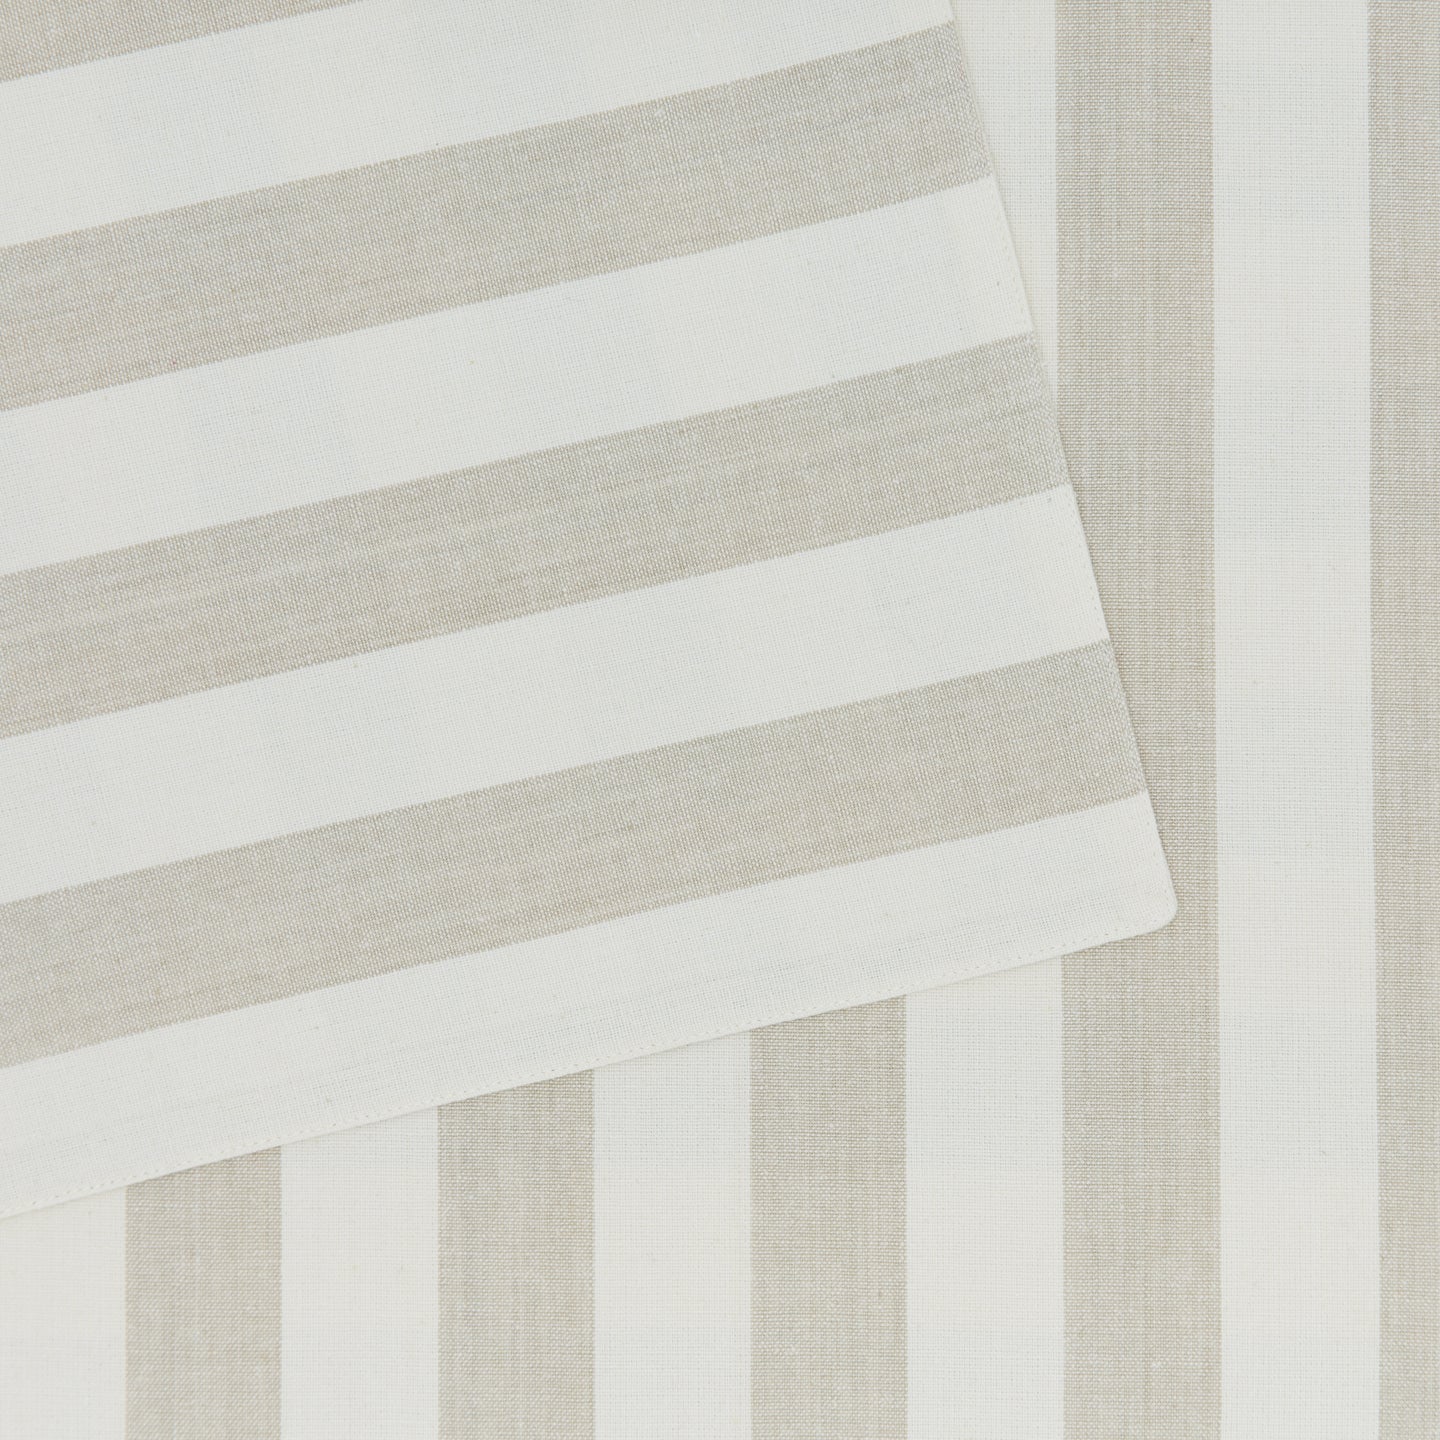 ESSENTIAL STRIPED PLACEMATS (SET OF 4) - IVORY/FLAX